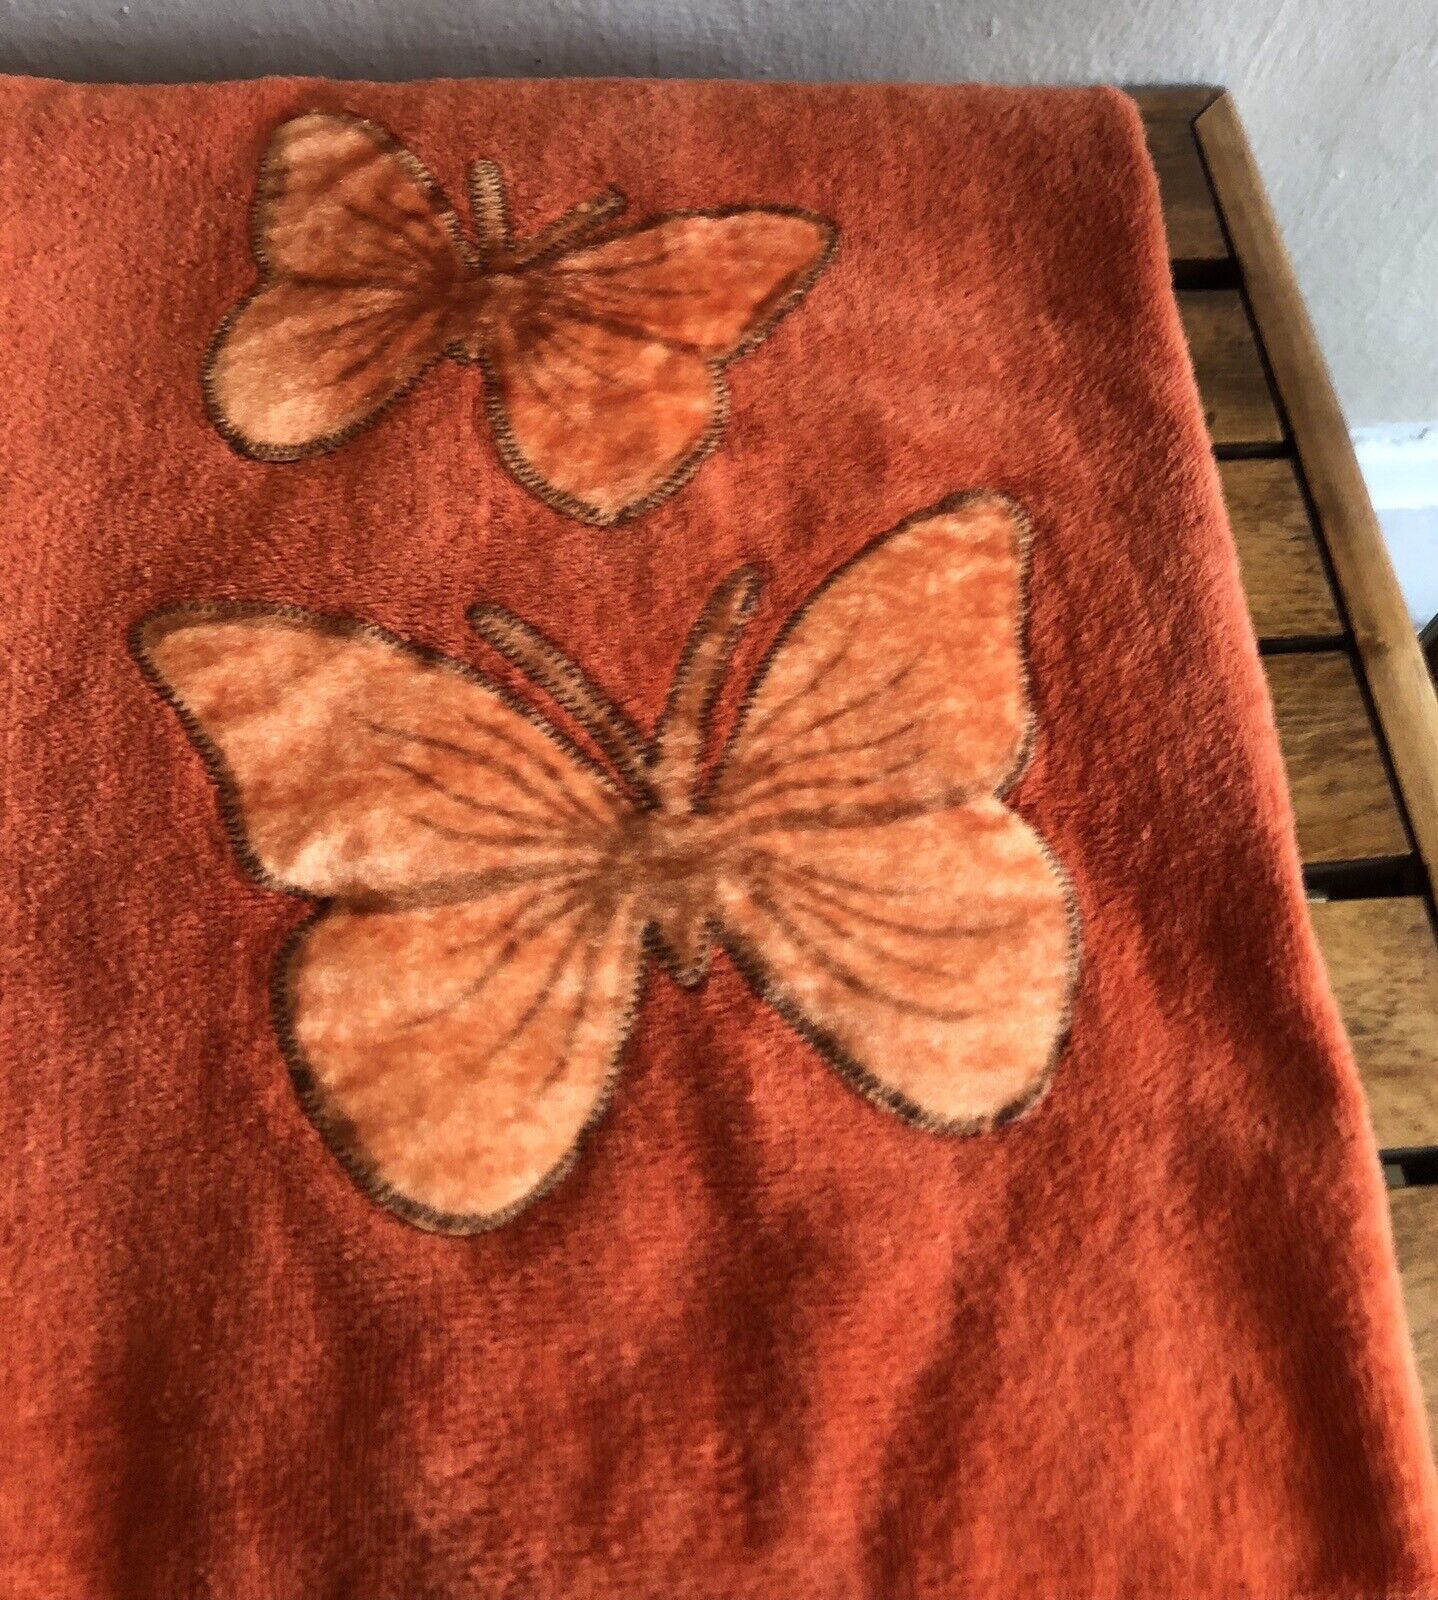 Sears Colormate Orange Butterfly 2 Bath Towel Set Vintage Soft And Vibrant